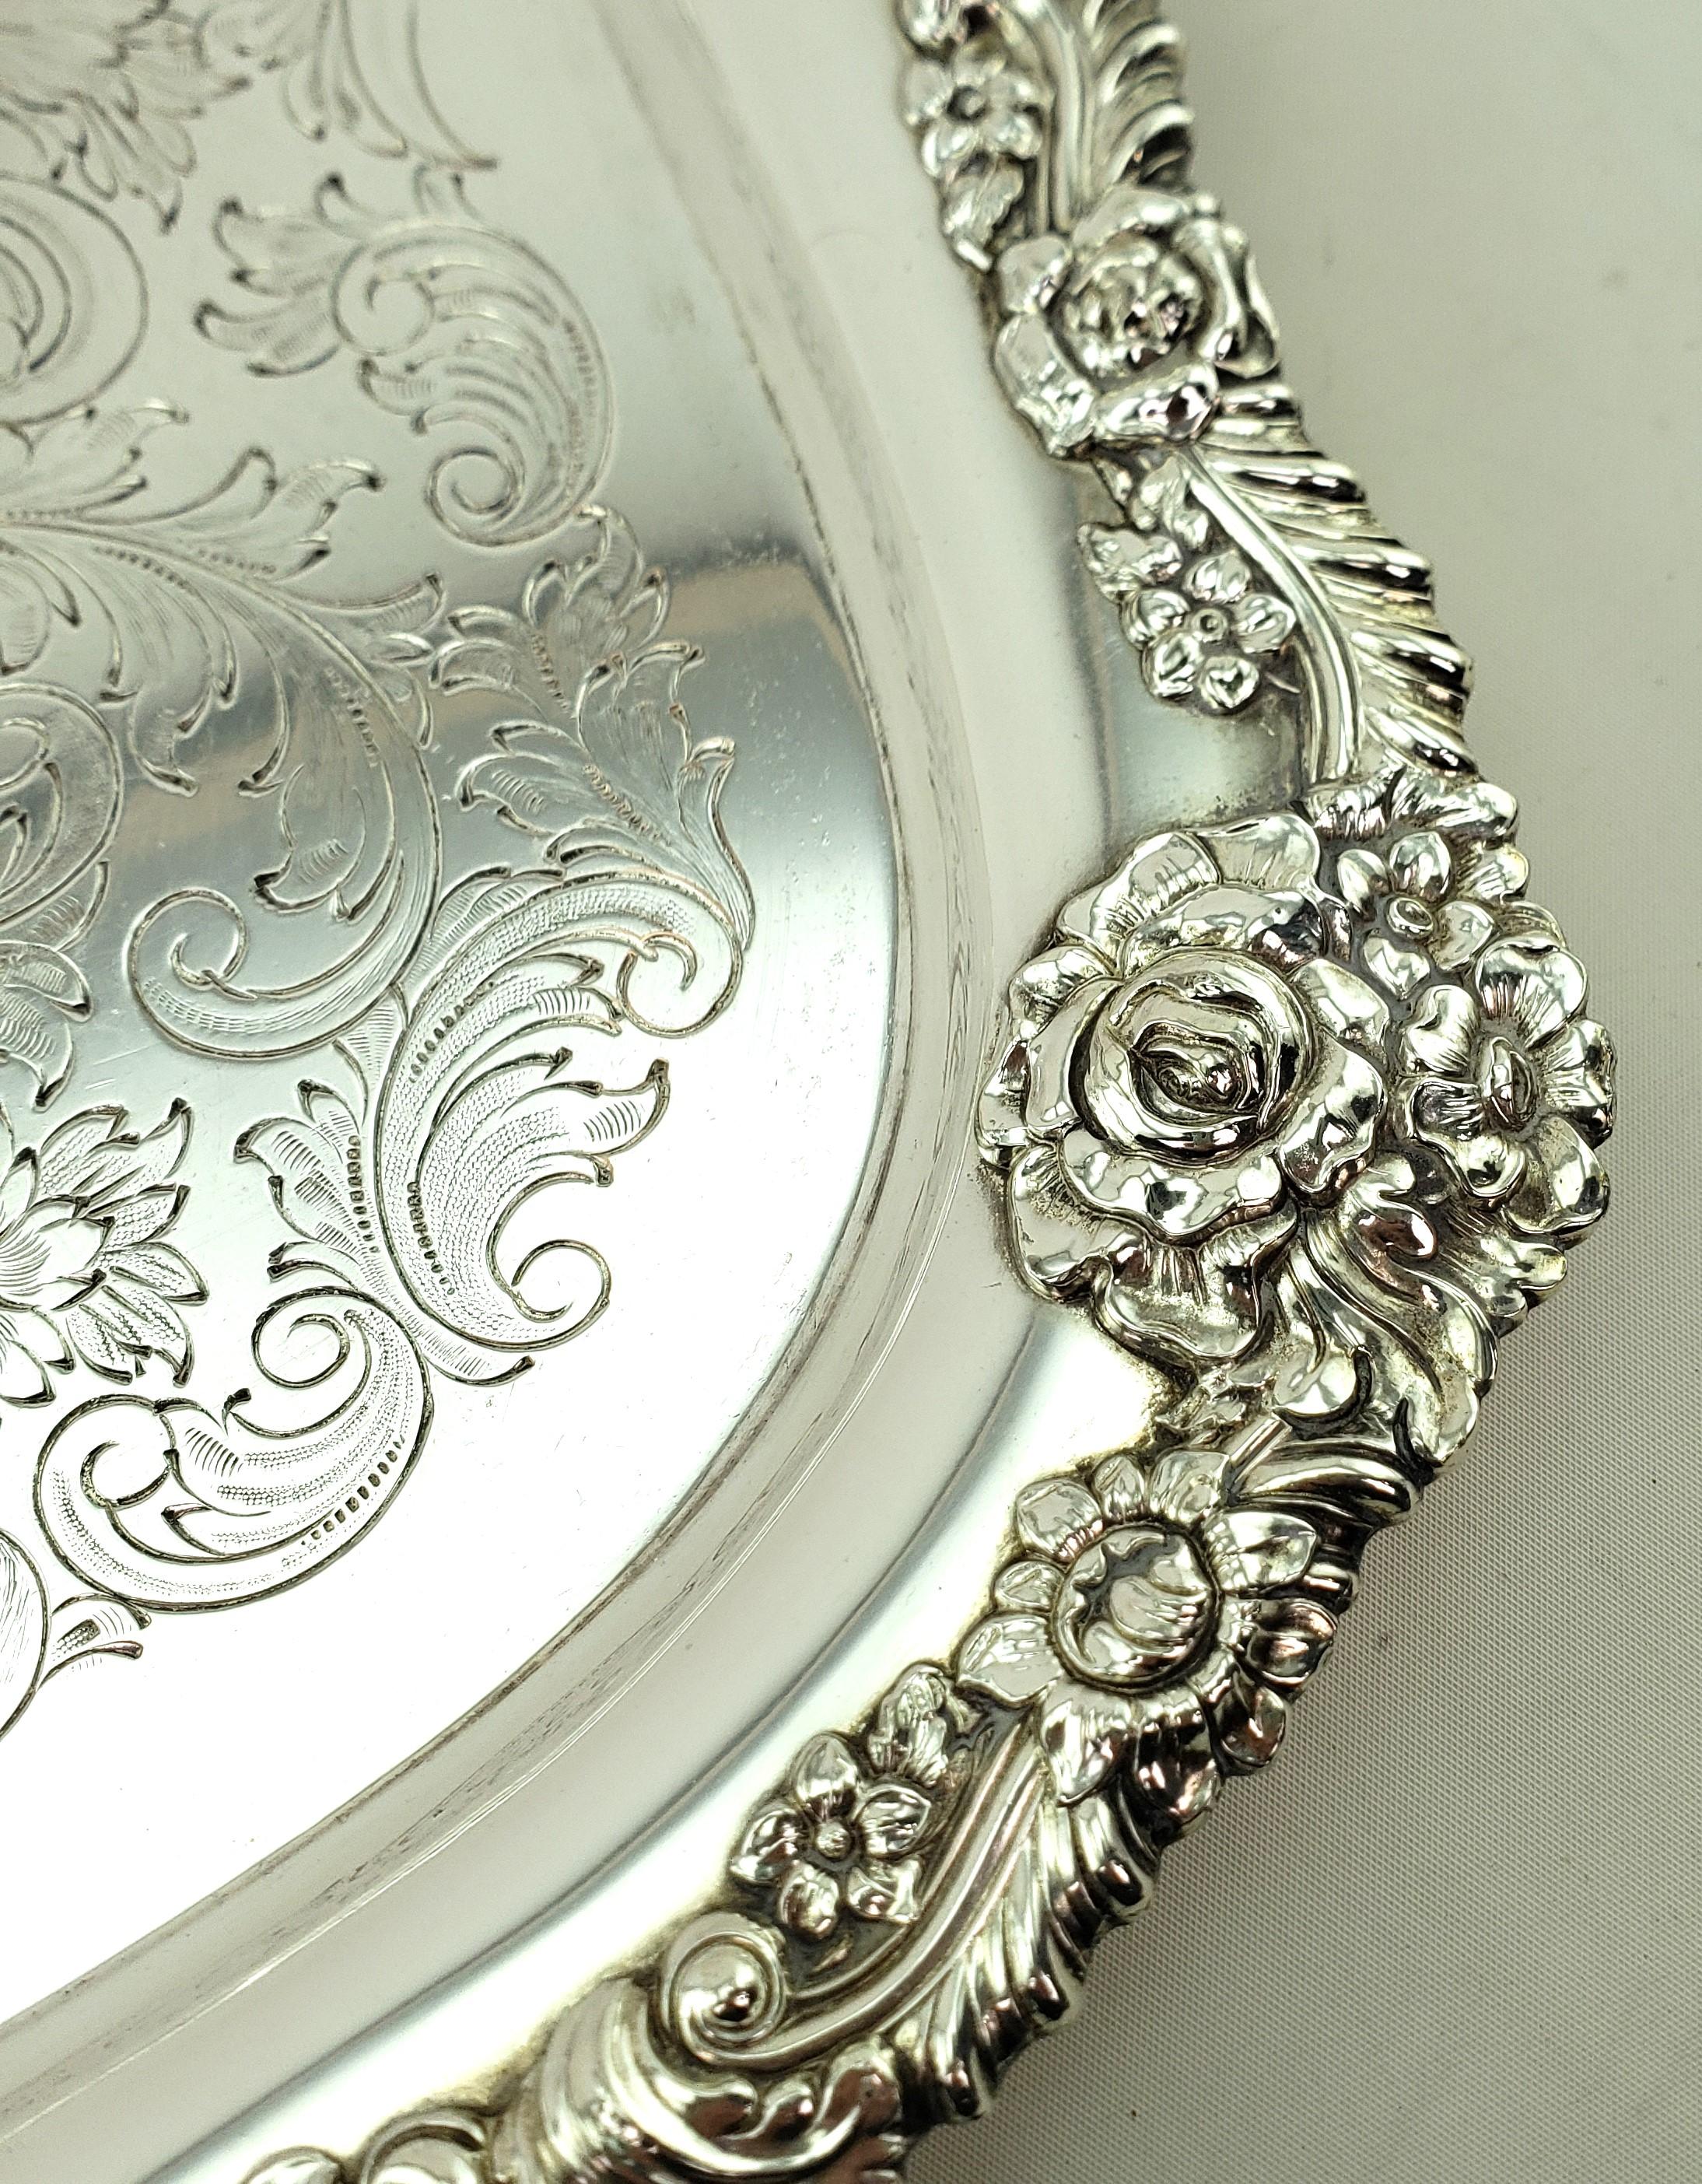 Large Antique English Silver Plated Serving Tray with Ornate Floral Decoration For Sale 5